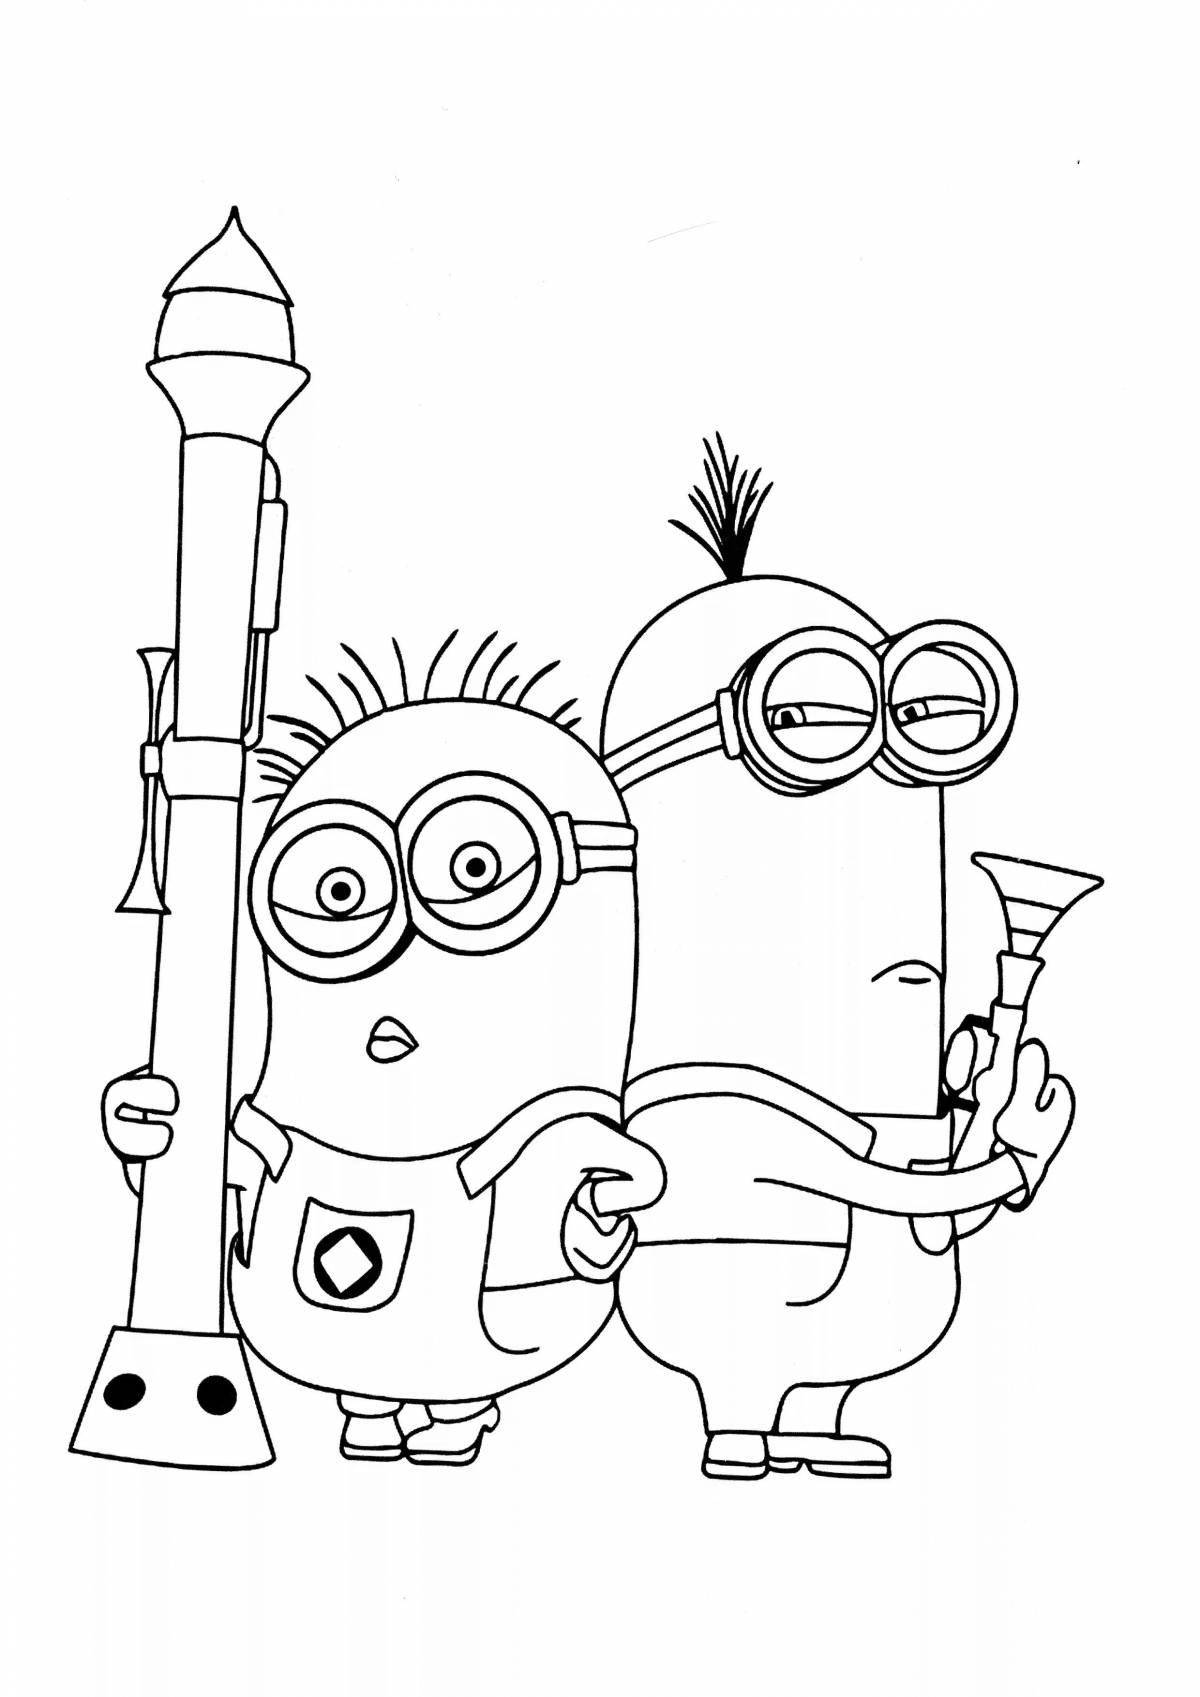 Colouring awesome kevin the minion